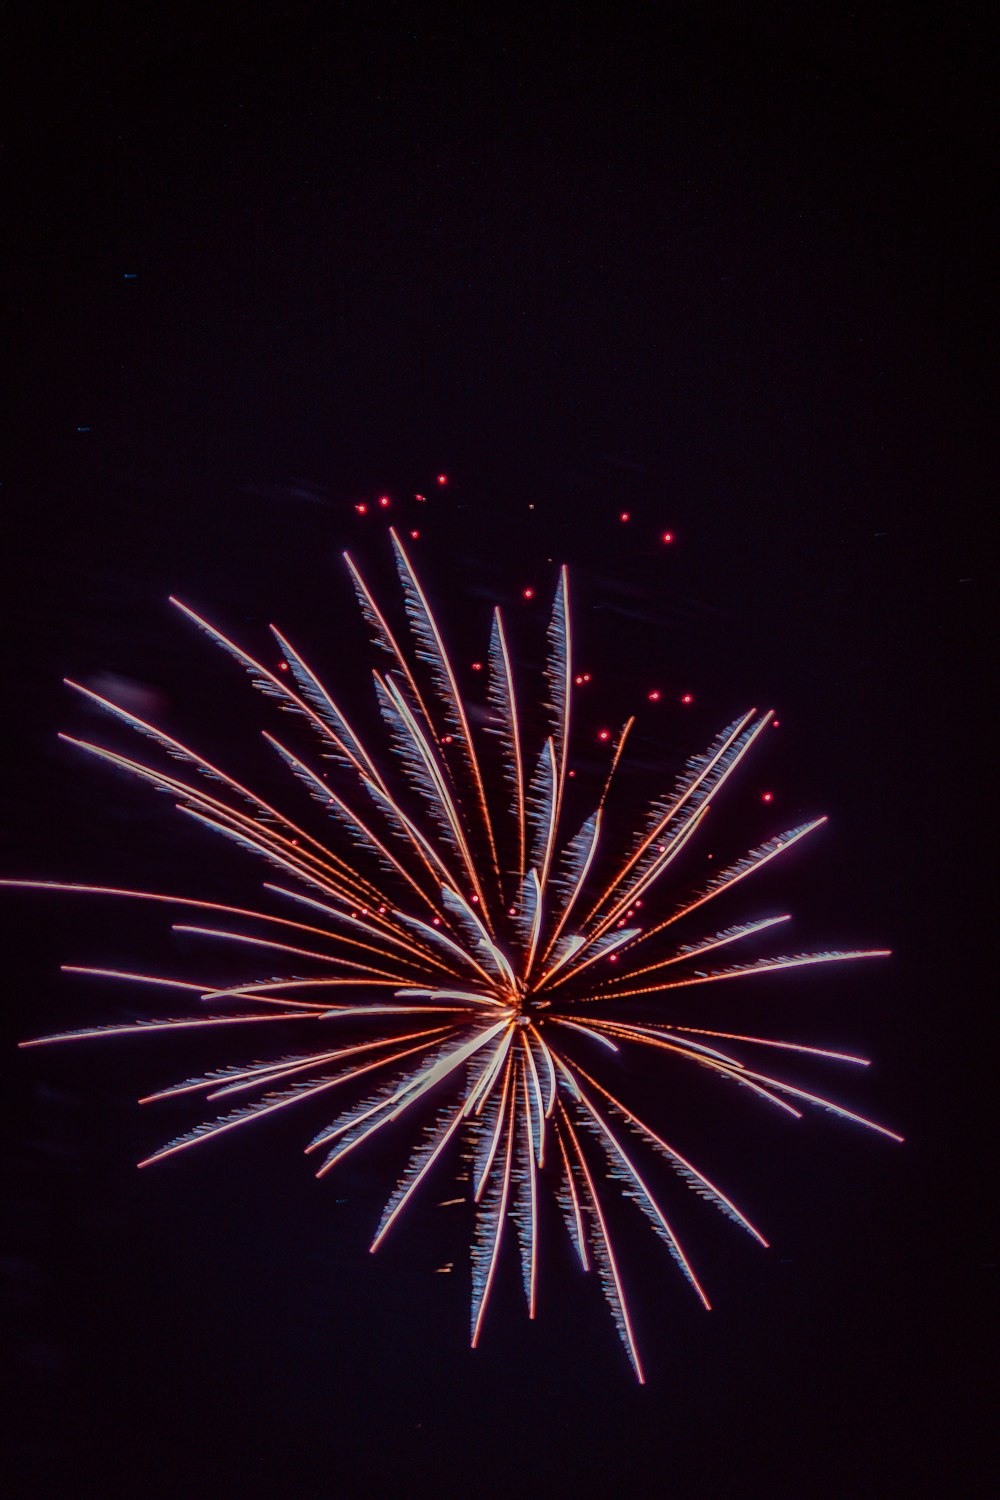 a colorful fireworks display in the night sky